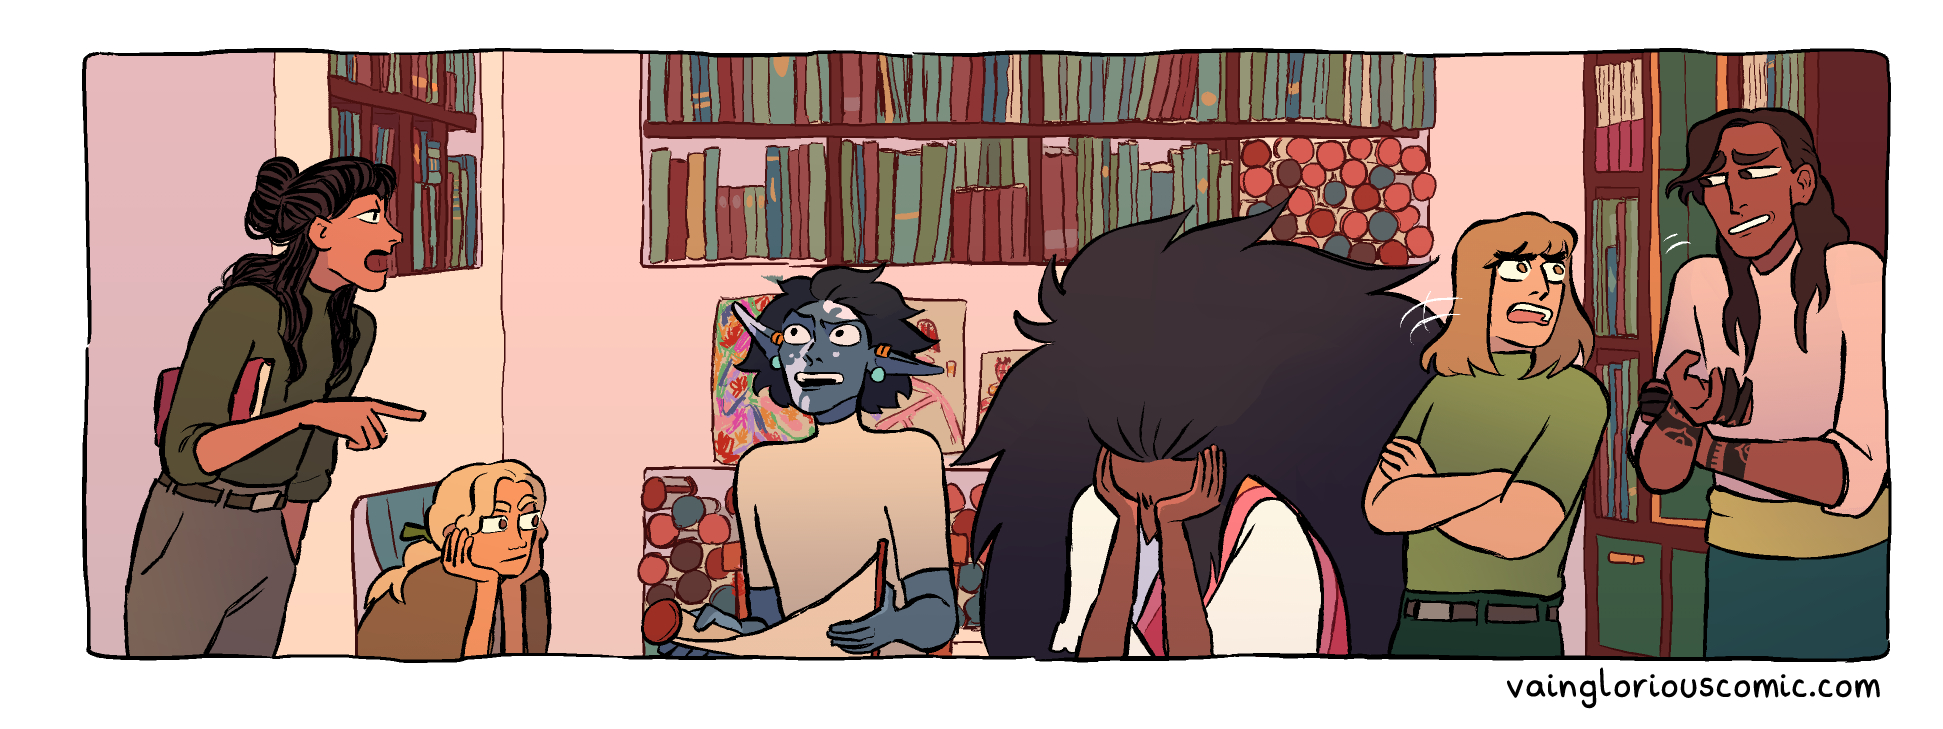 Crop of panel 4 without text. Mercury is informing the group about Carla while Slate observes and Von listens. Rei has his head in his hands, Hammer turns to Ash while asking about the number of inhabitants in the house and Ash shrugs.